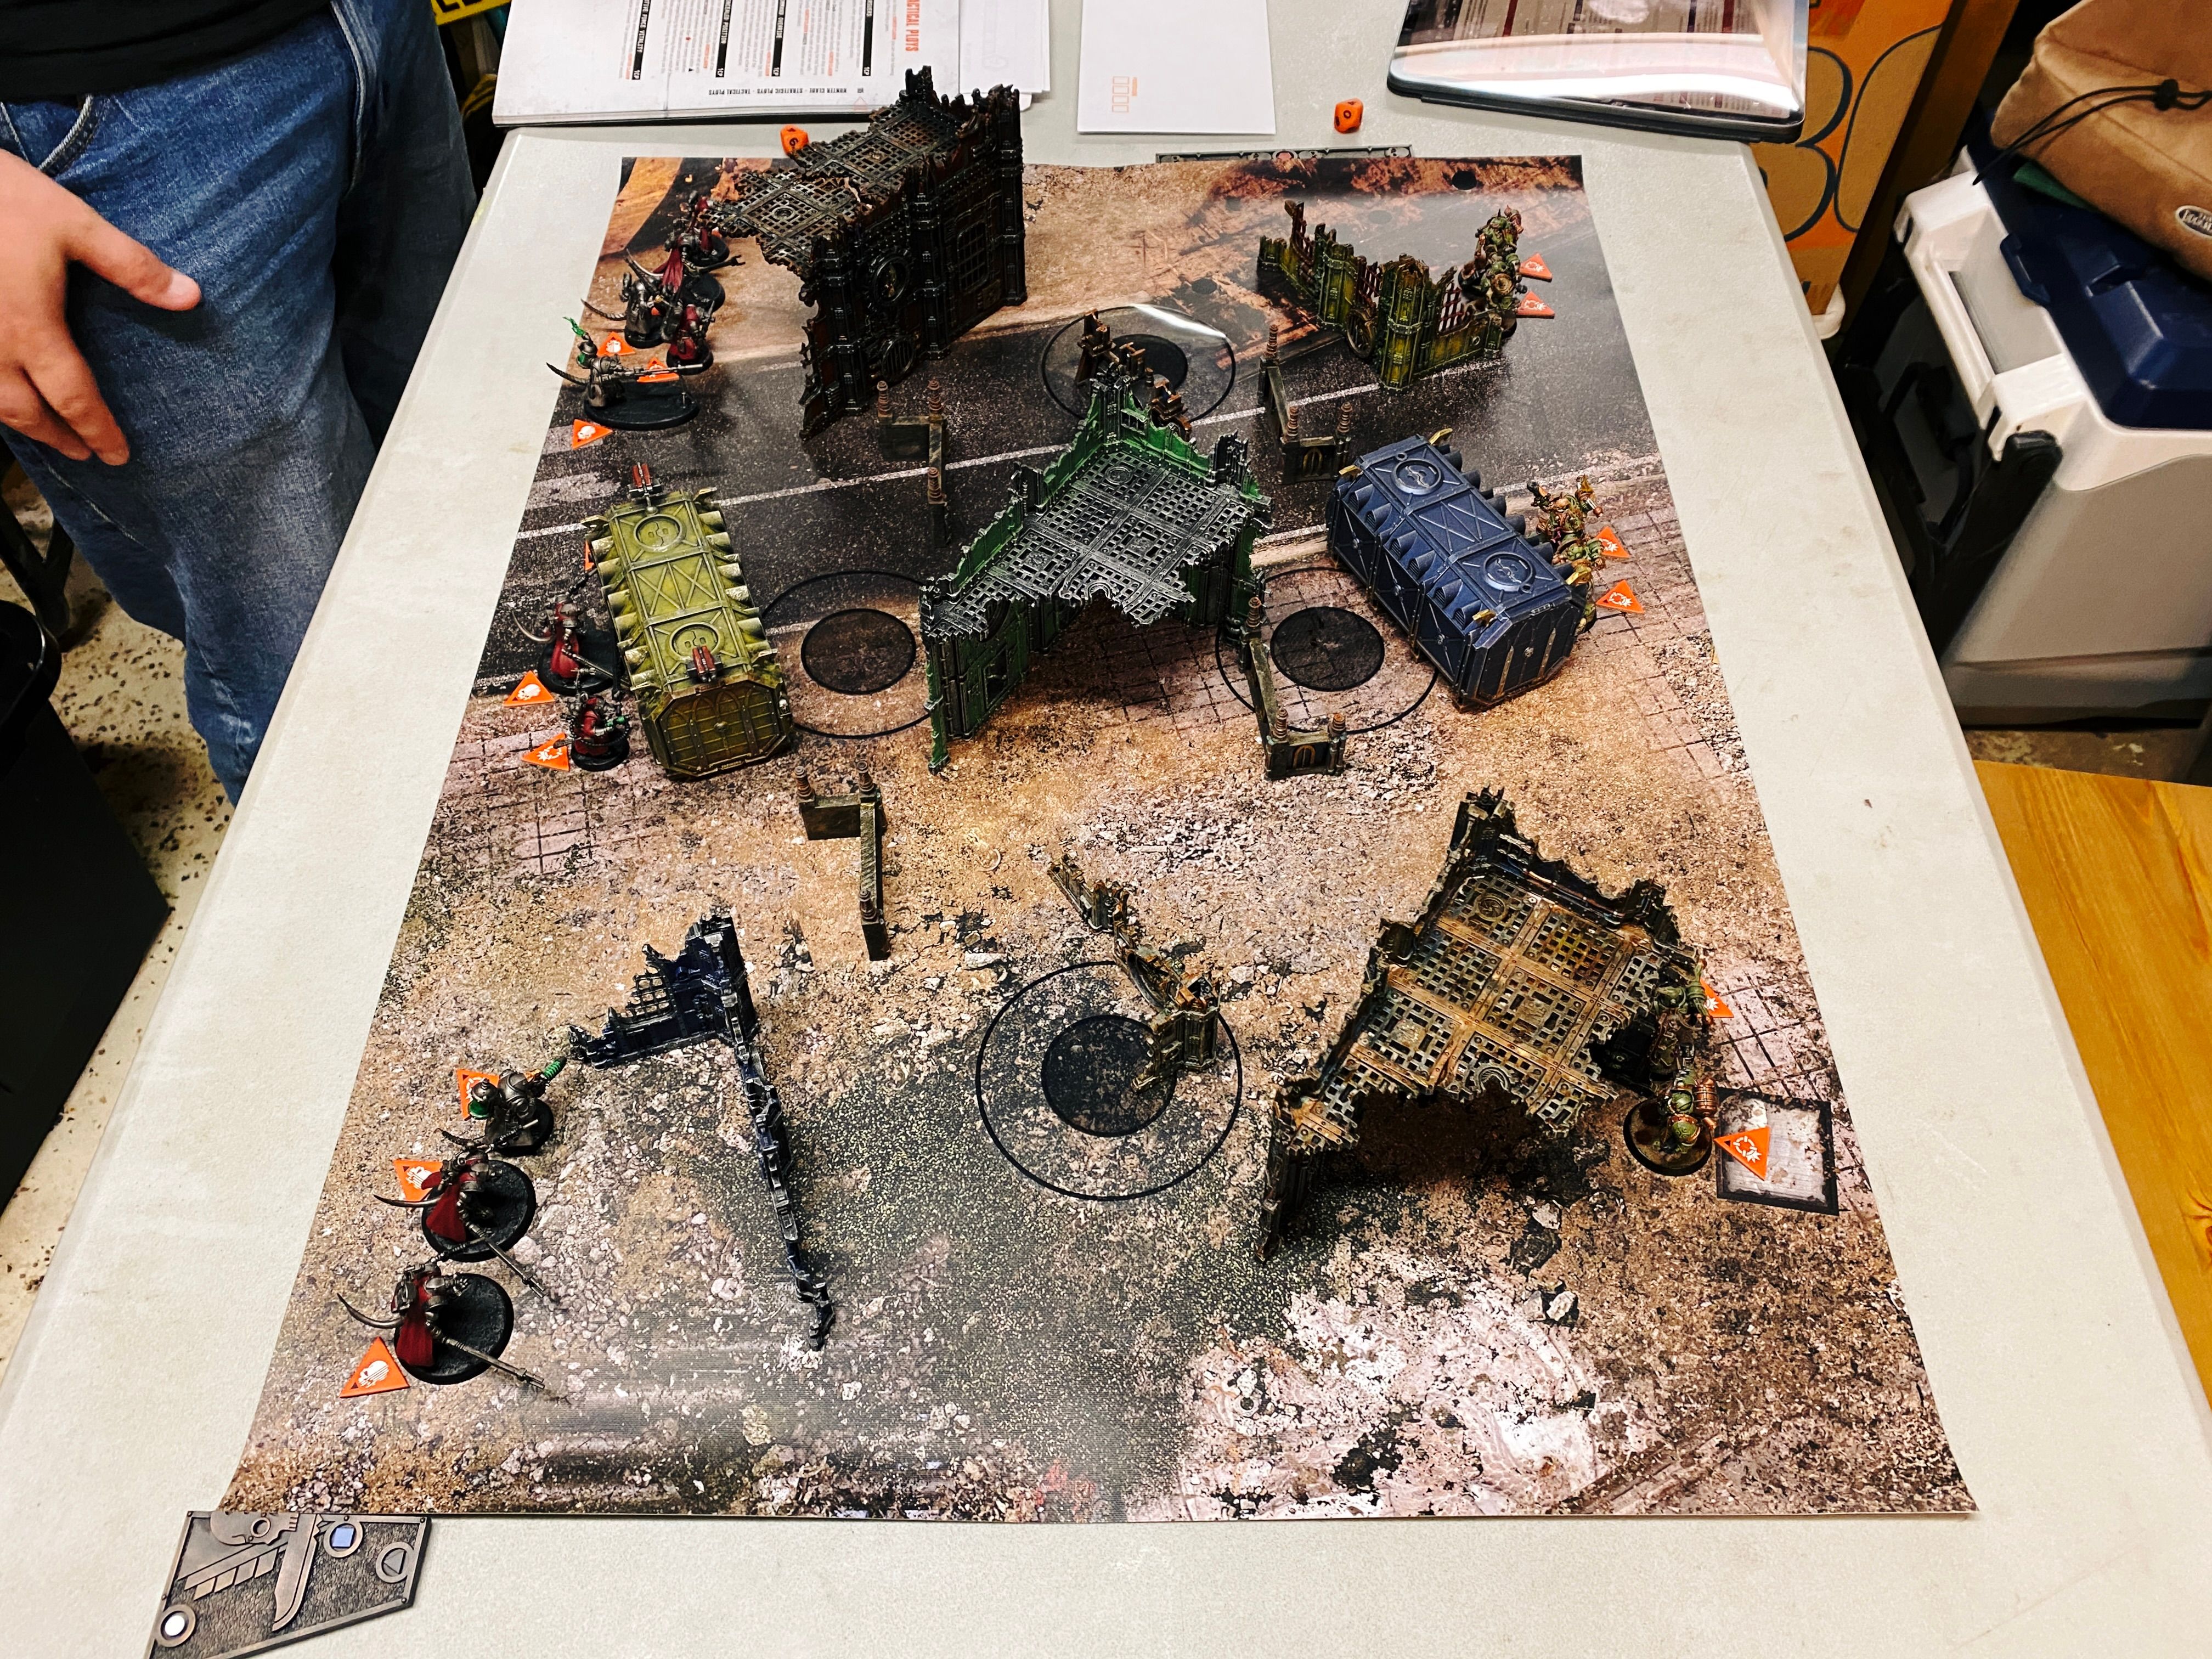 A photo taken from the side of the board of a game of Warhammer 40,000: Kill Team. The terrain is all ruined industrial-slash-gothic buildings, on the left are my Death Guard which are hulking super-humans in a somewhat sickly-green power armour and lots of tentacles and pustules and general grossness, and on the right are the Adeptus Mechanicus who believe in the purity of the machine and replacing as much as possible of their biological components with machine parts and such mostly look like robots with cool cloaks on.

(The AdMech were actually custom 3D-printed models that combined the Adeptus Mechanicus with the Skaven rat-men from the Warhammer fantasy universe, and were really very well done.)